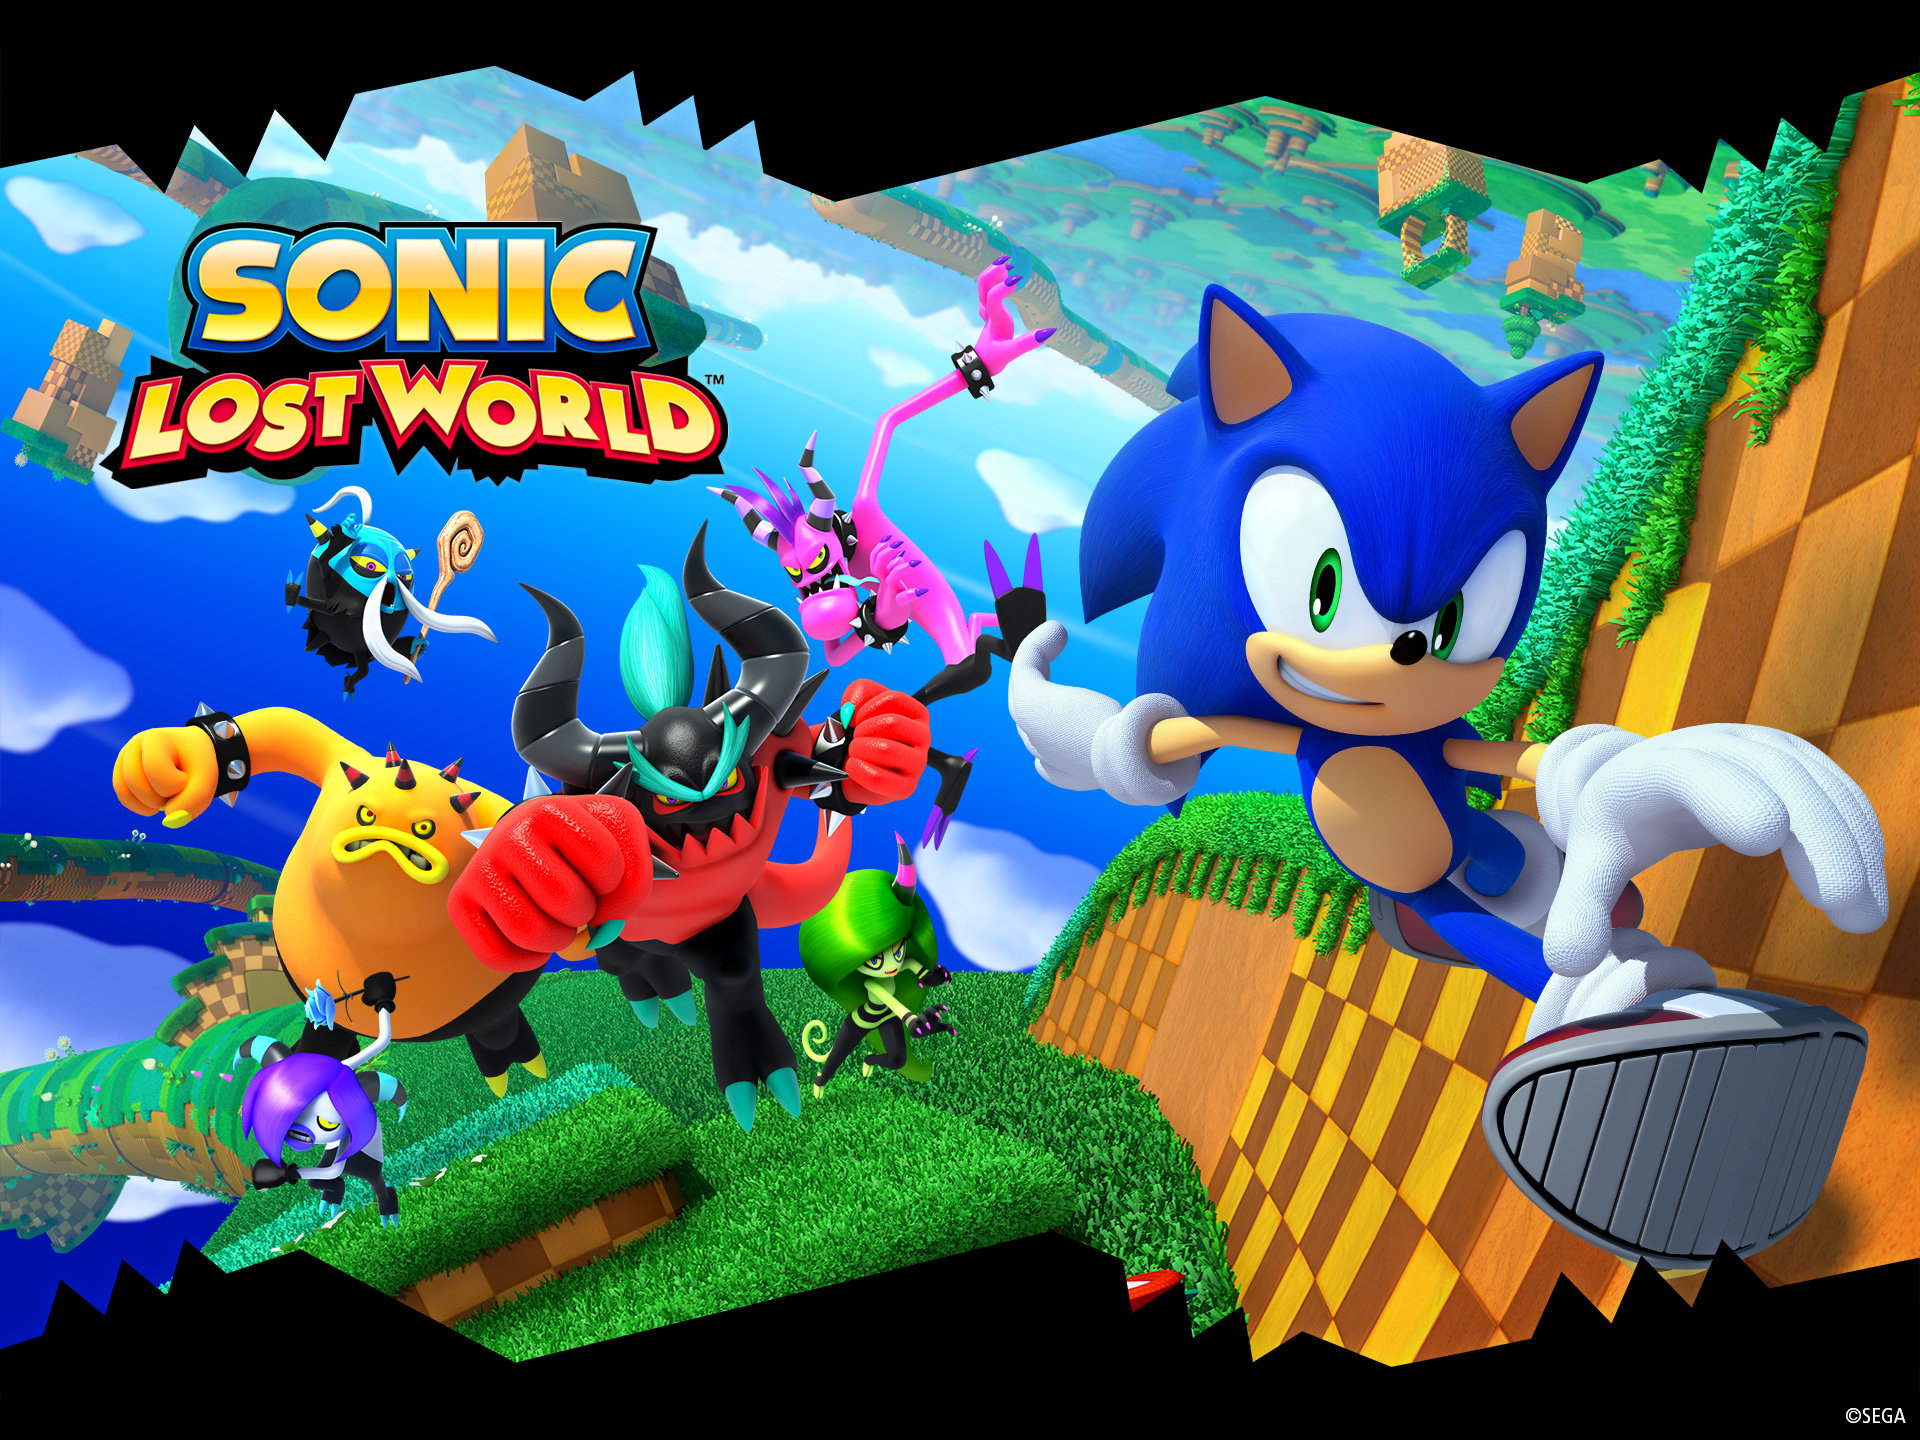 Sonic Lost World Wallpapers Hd For Desktop Backgrounds